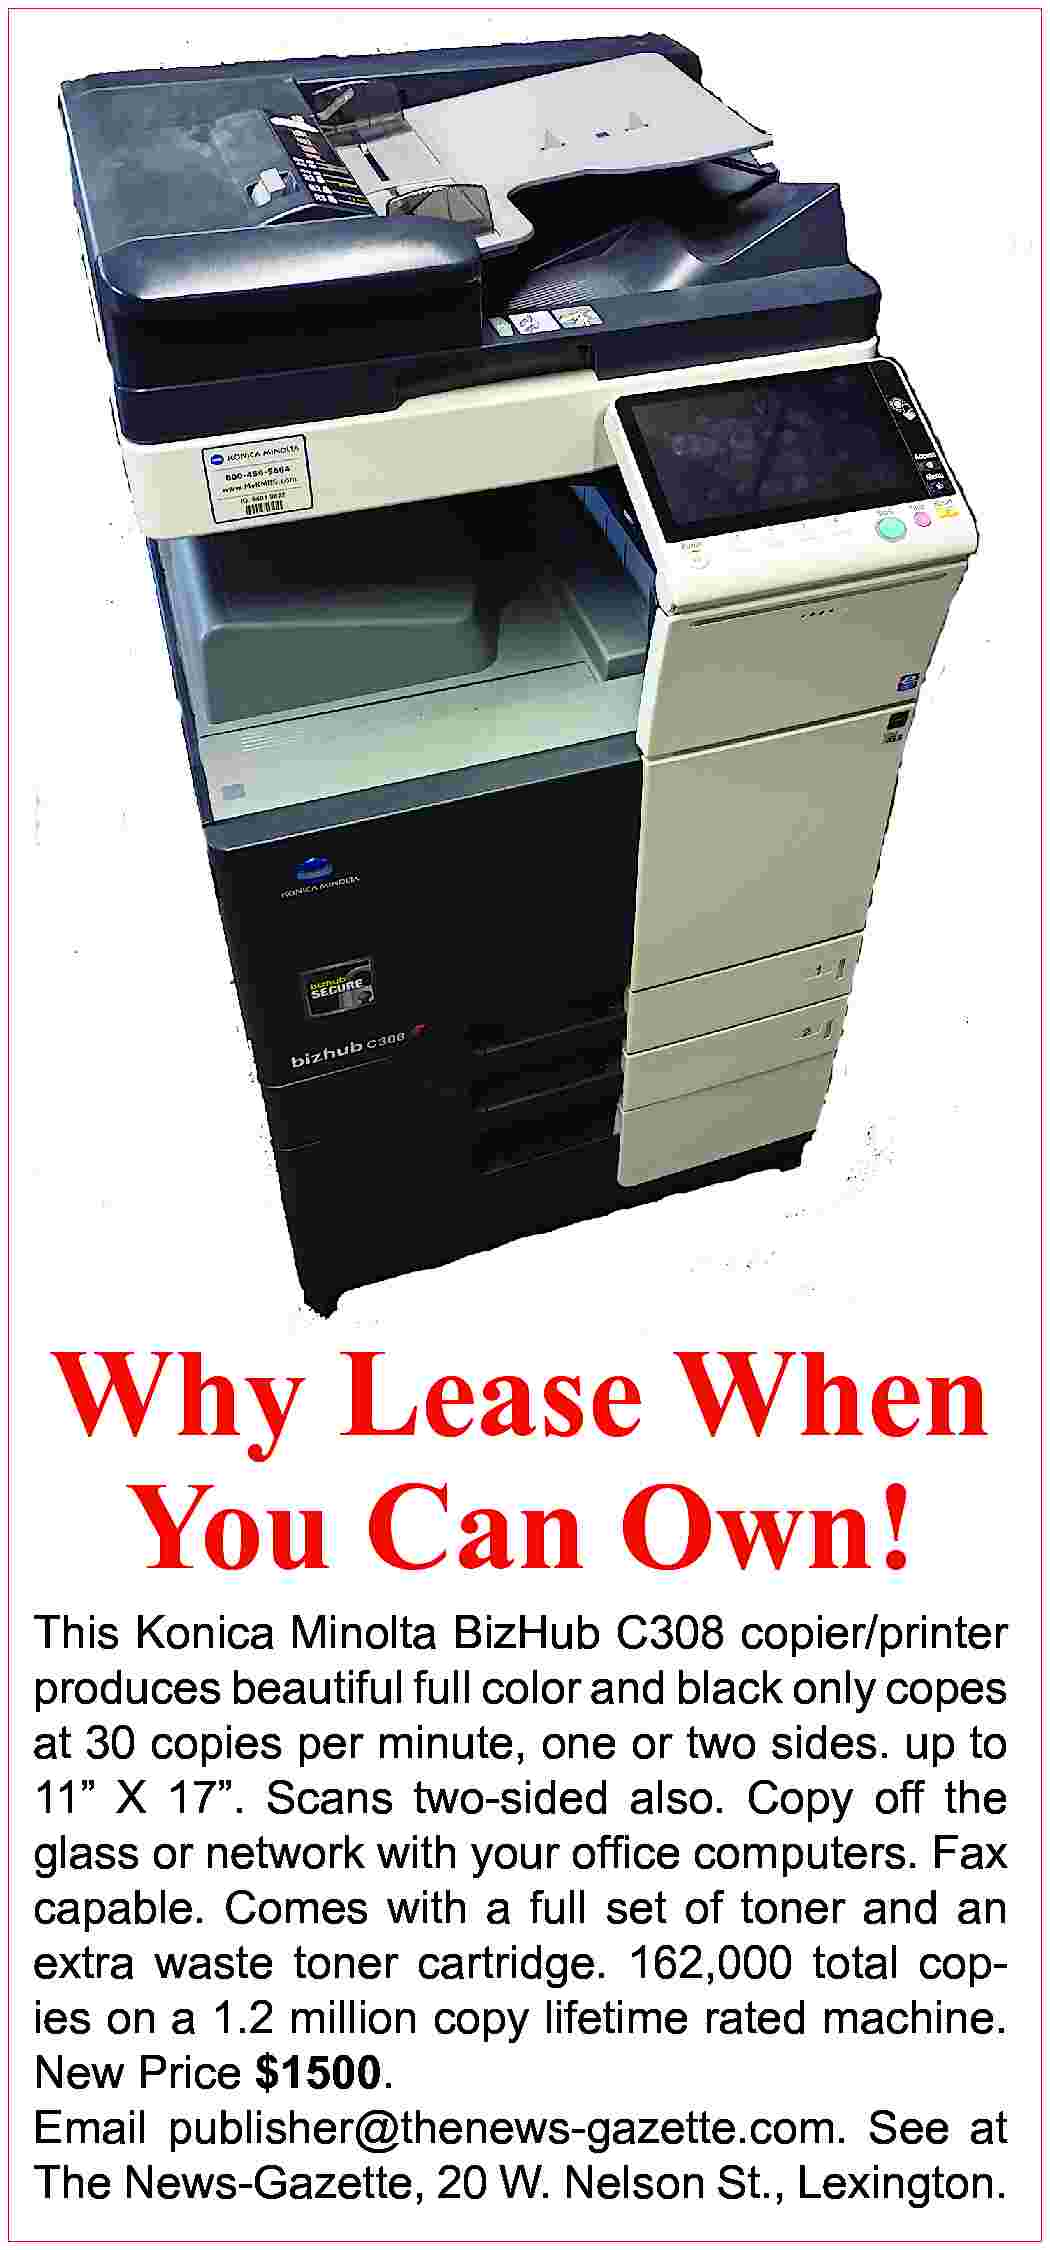 Why Lease When You Can  Why Lease When You Can Own! This Konica Minolta BizHub C308 copier/printer produces beautiful full color and black only copes at 30 copies per minute, one or two sides. up to 11” X 17”. Scans two-sided also. Copy off the glass or network with your office computers. Fax capable. Comes with a full set of toner and an extra waste toner cartridge. 162,000 total copies on a 1.2 million copy lifetime rated machine. New Price $1500. Email publisher@thenews-gazette.com. See at The News-Gazette, 20 W. Nelson St., Lexington.